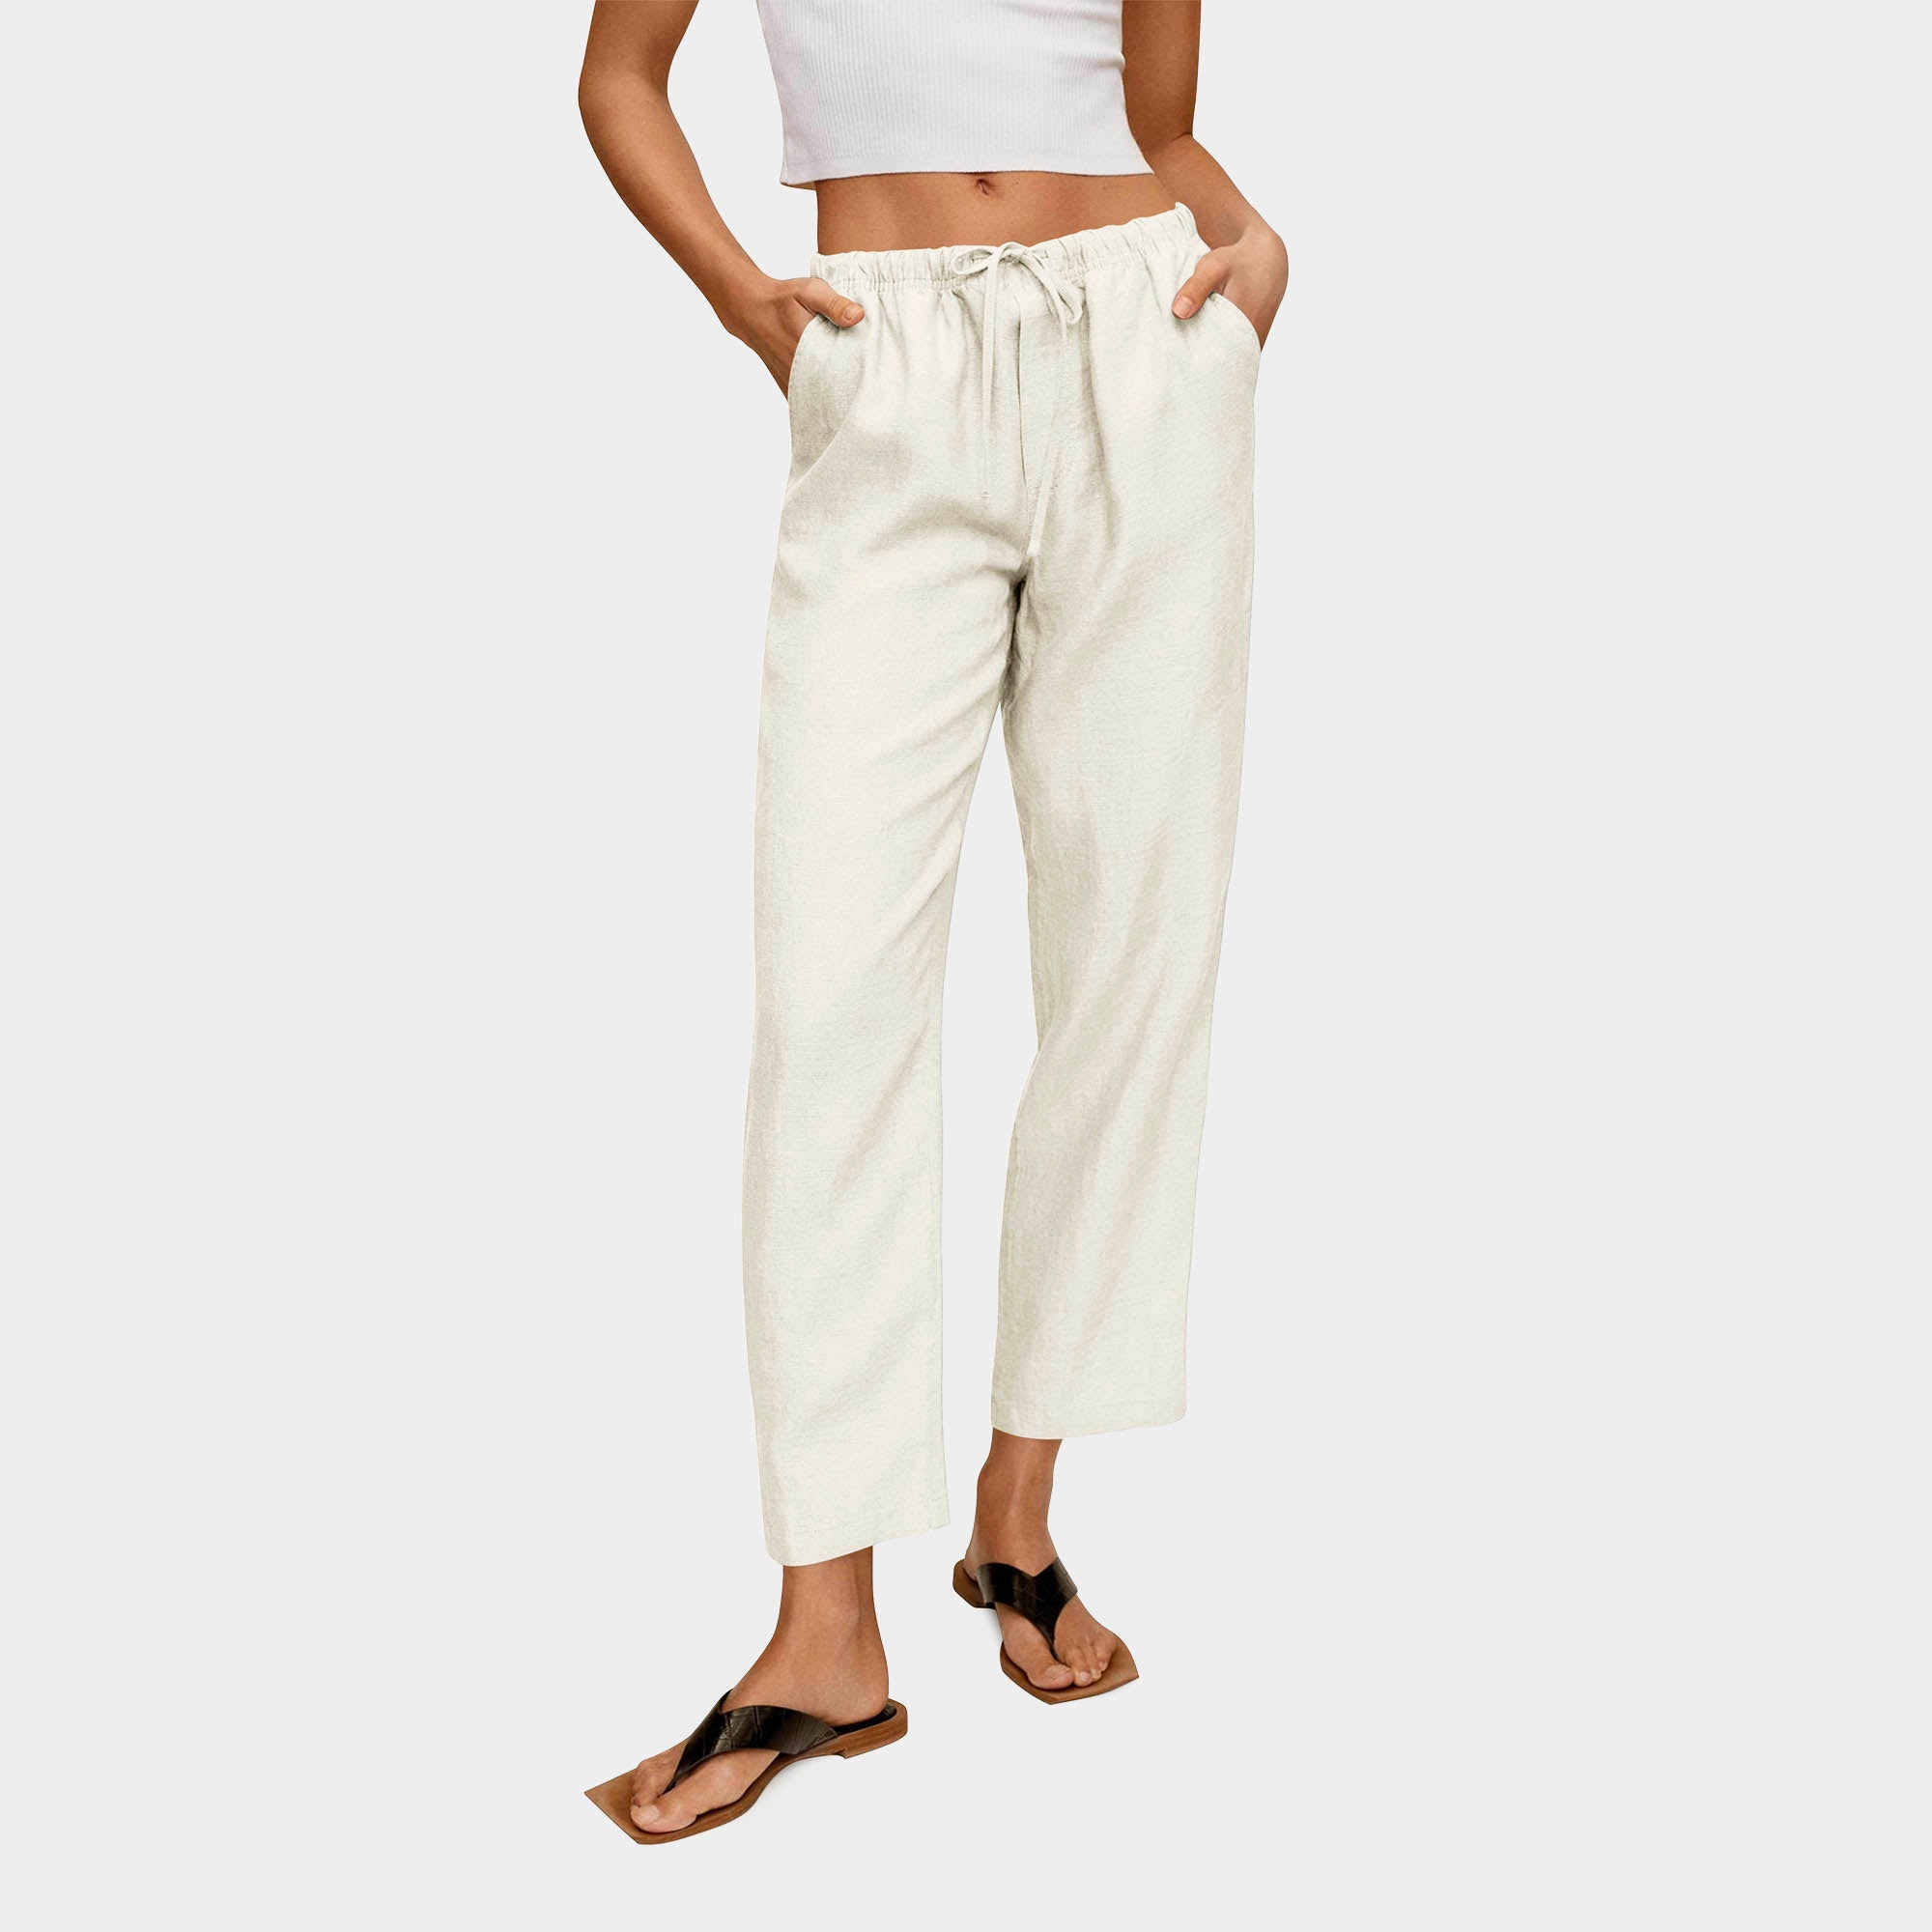 womens_linen pants_linen_trousers_work at home_remote_formal business_casual_missy_old navy_wide leg_plus size_petite_linen_blend pants_cotton_macys_zara_oceanside_beach_pants_roxy_romper_drawstring_summer_coverup_tote_resort pants_relax_organic_cotton_hawaii_clearance_Naturallinen